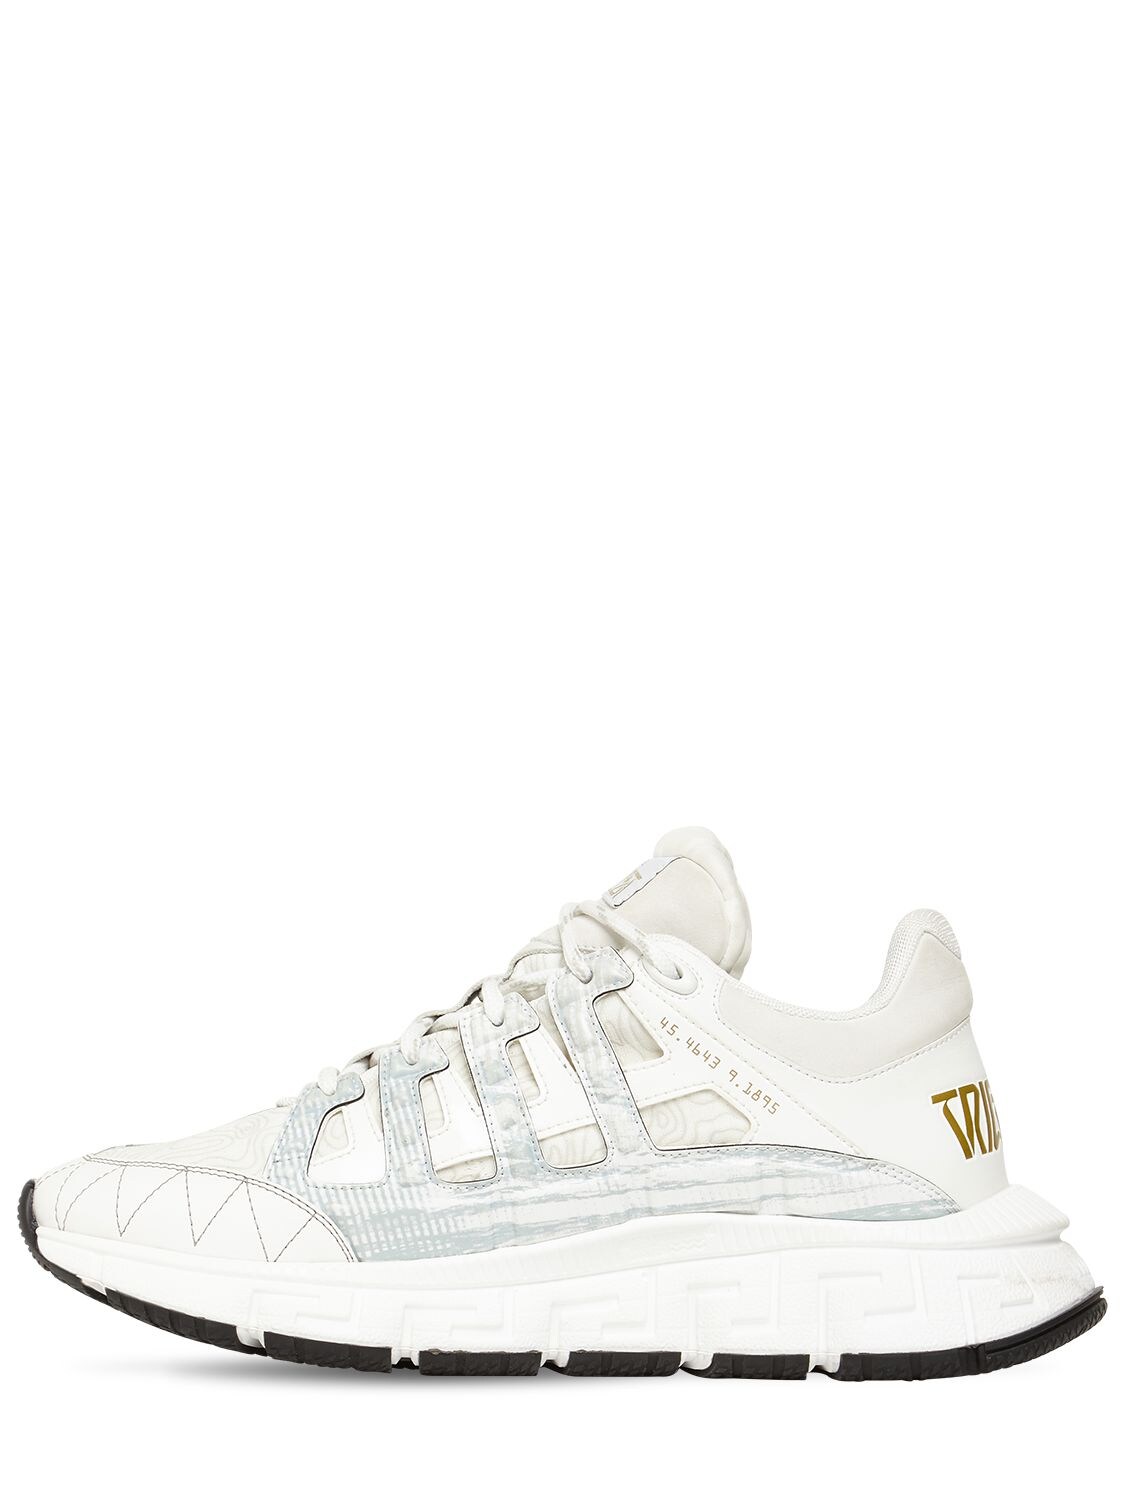 Shop Versace Trigreca Logo Mesh & Leather Sneakers In White,gold